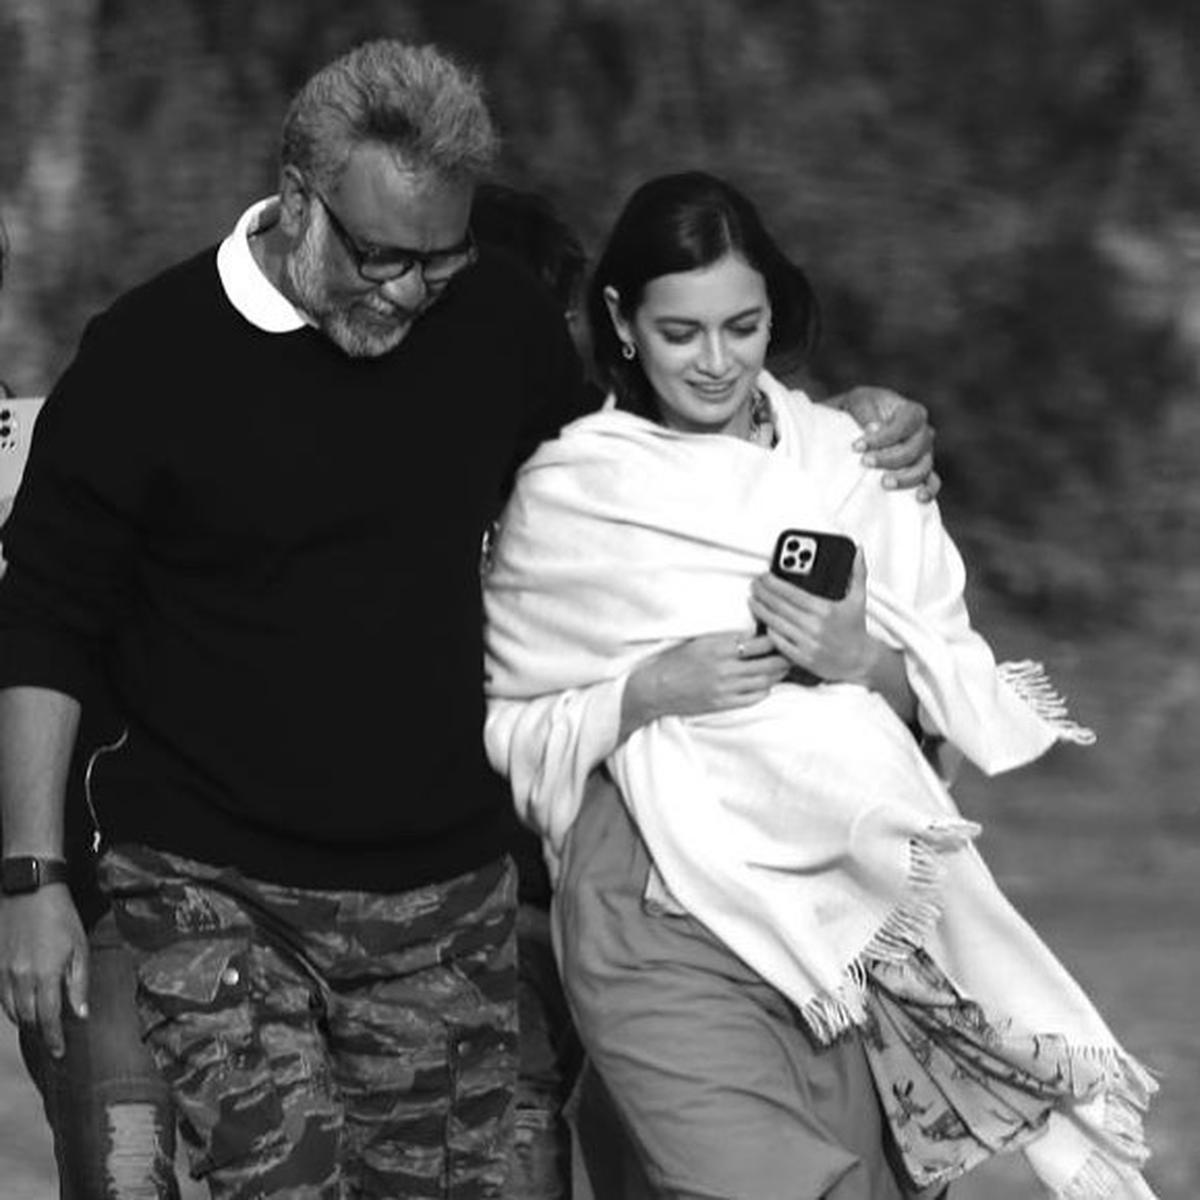 Anubhav Sinha with frequent collaborator Dia Mirza on the sets of ‘Bheed’ 